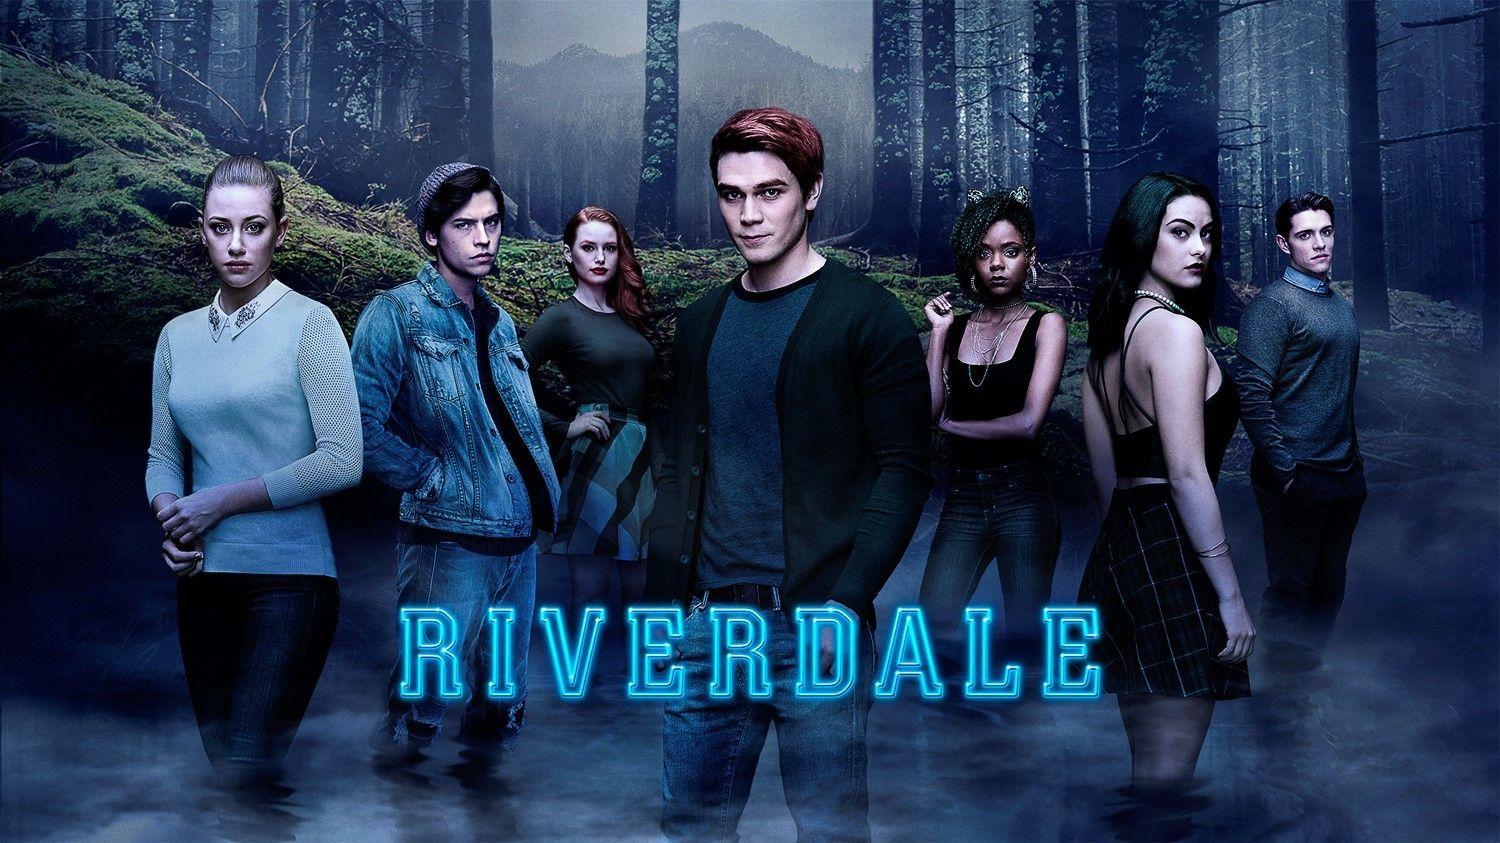 Riverdale Wallpapers - Top Free